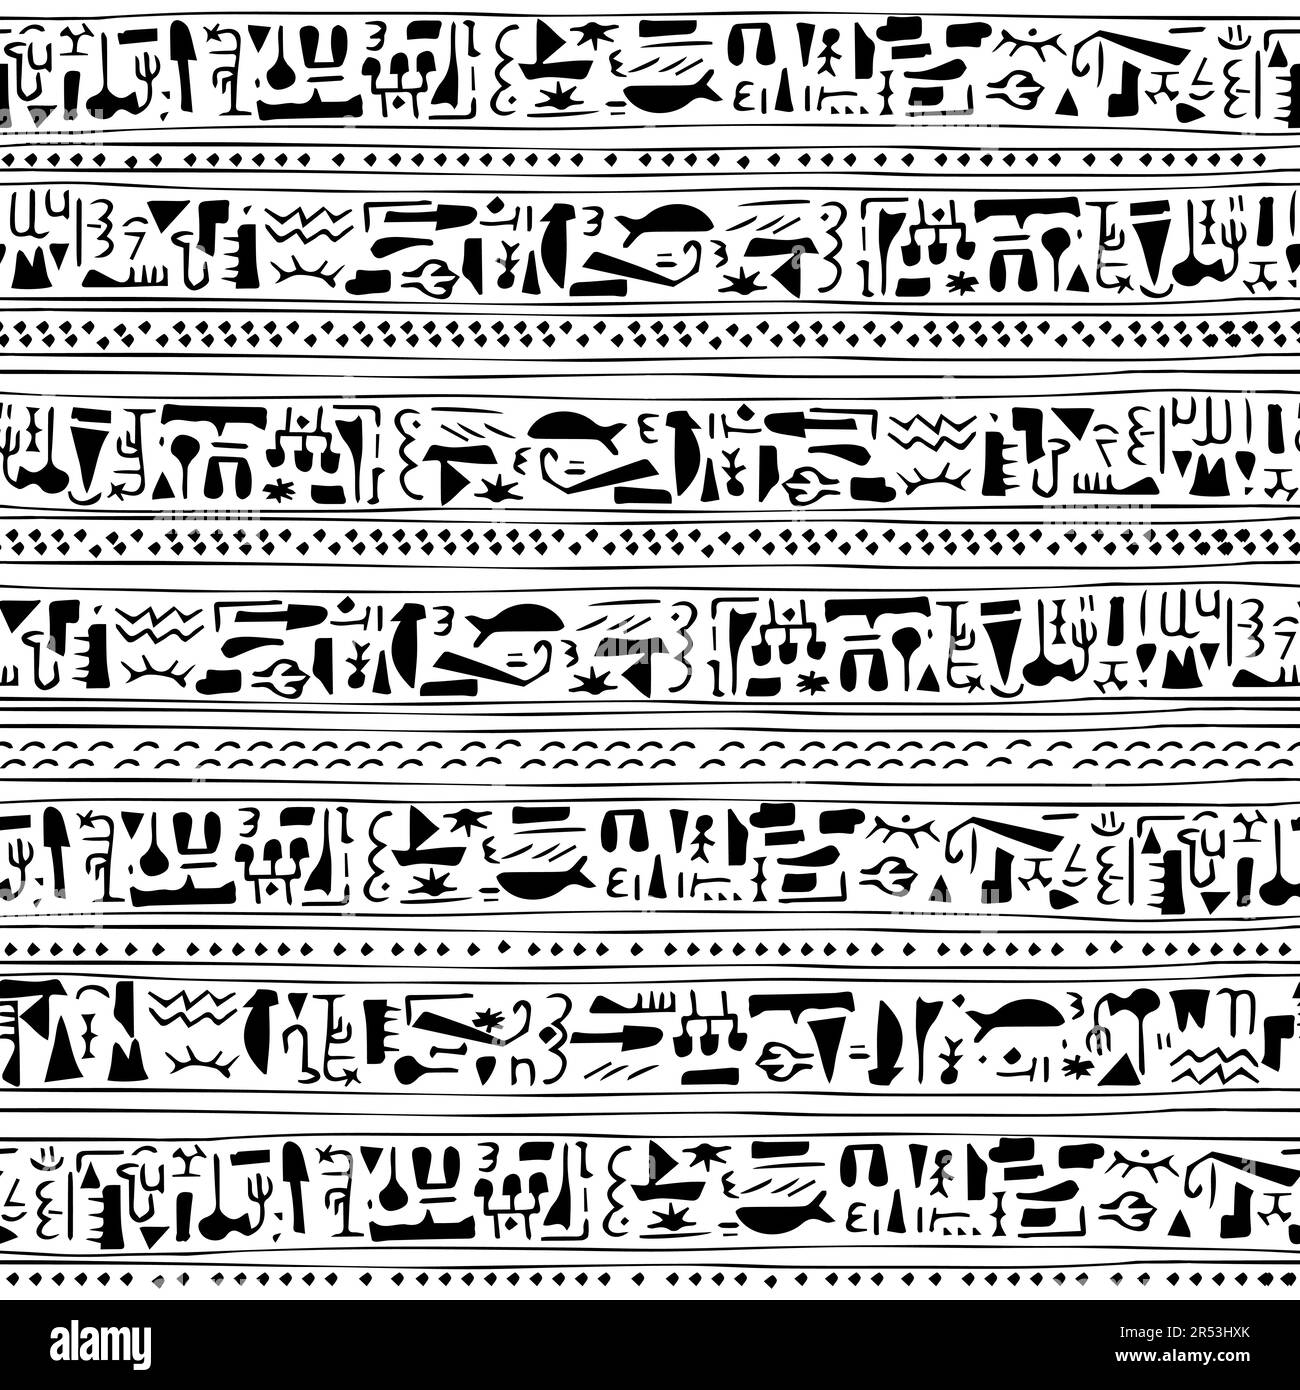 Captivating vector artwork featuring hand-drawn symbols resembling Egyptian hieroglyphs, seamless pattern for adding a touch of mystery and historical Stock Vector